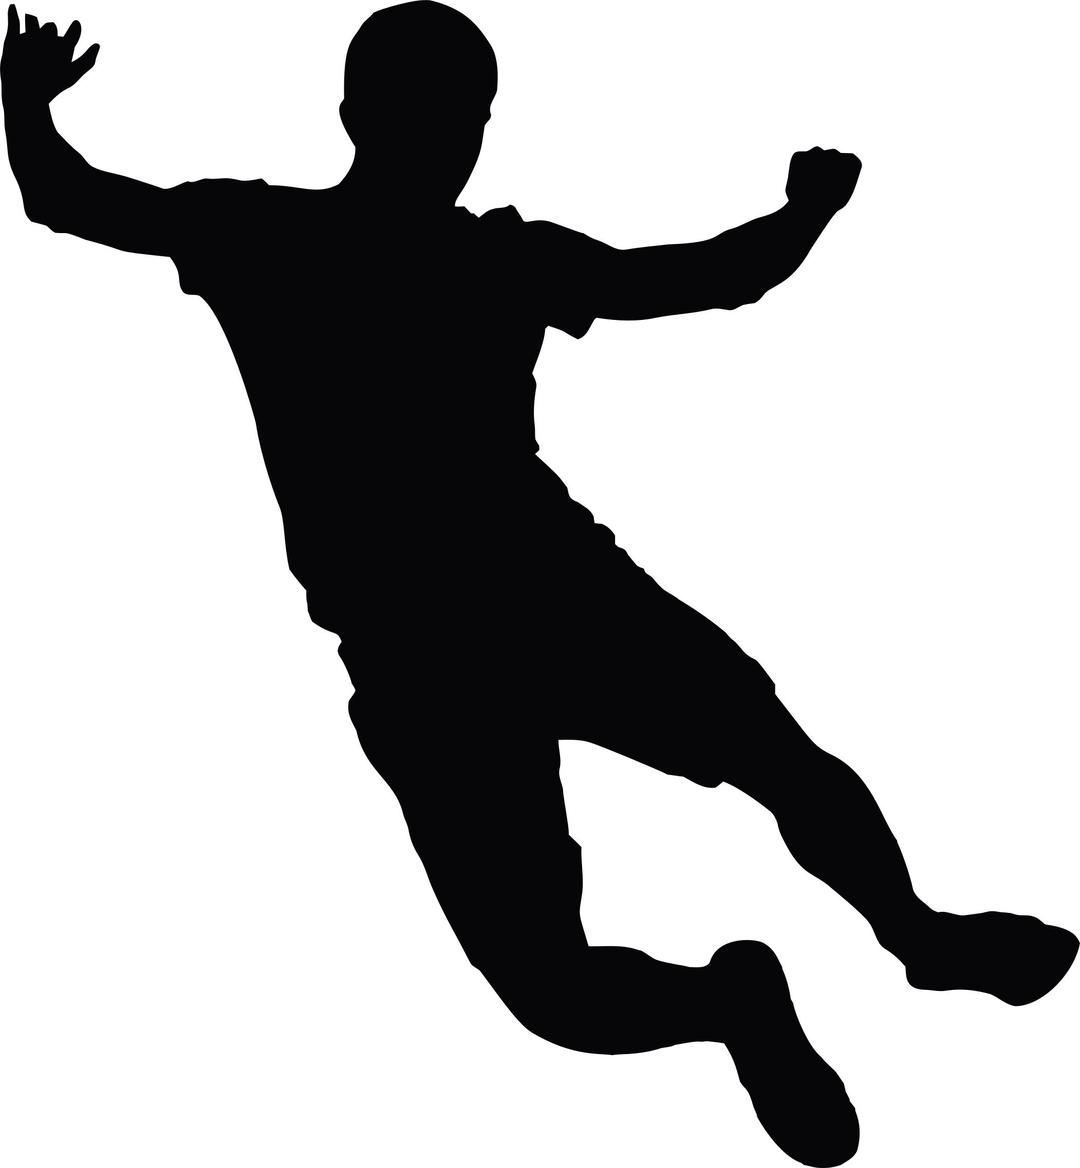 Jumping Man Silhouette 2 png transparent